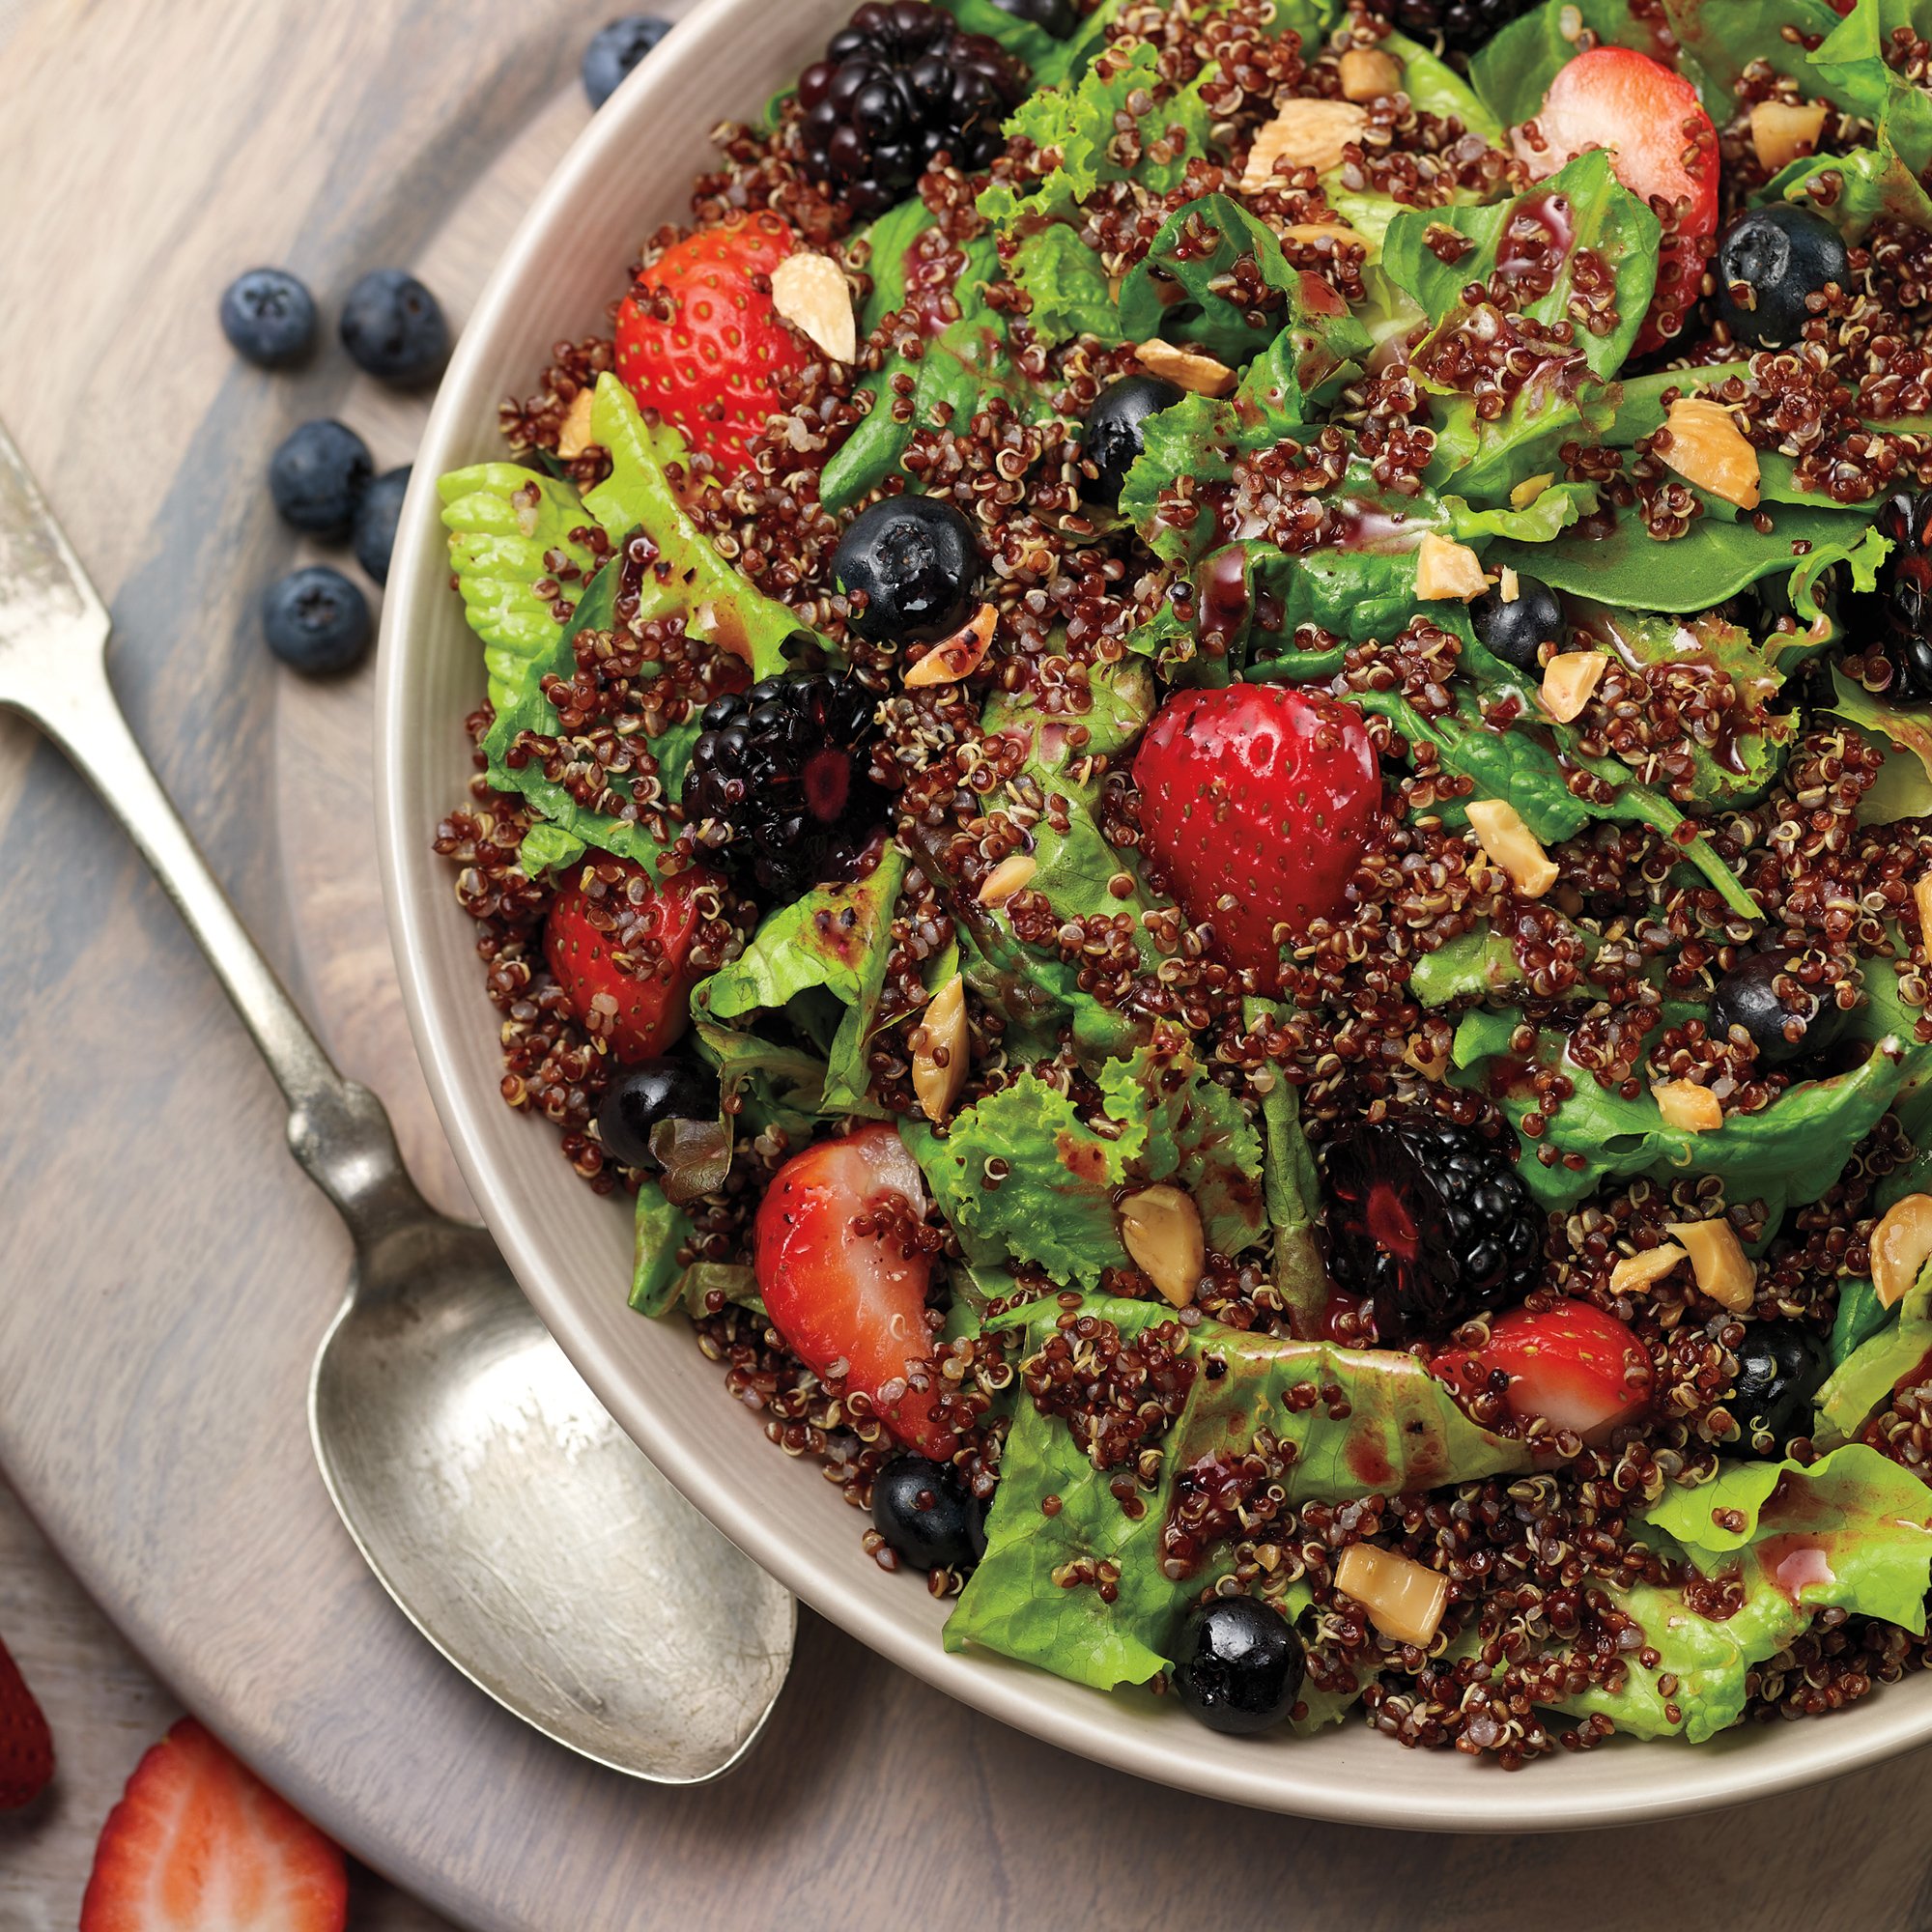 indlysende mode Merchandising Red Quinoa Salad with Mixed Greens and Berry Vinaigrette Recipe from H-E-B